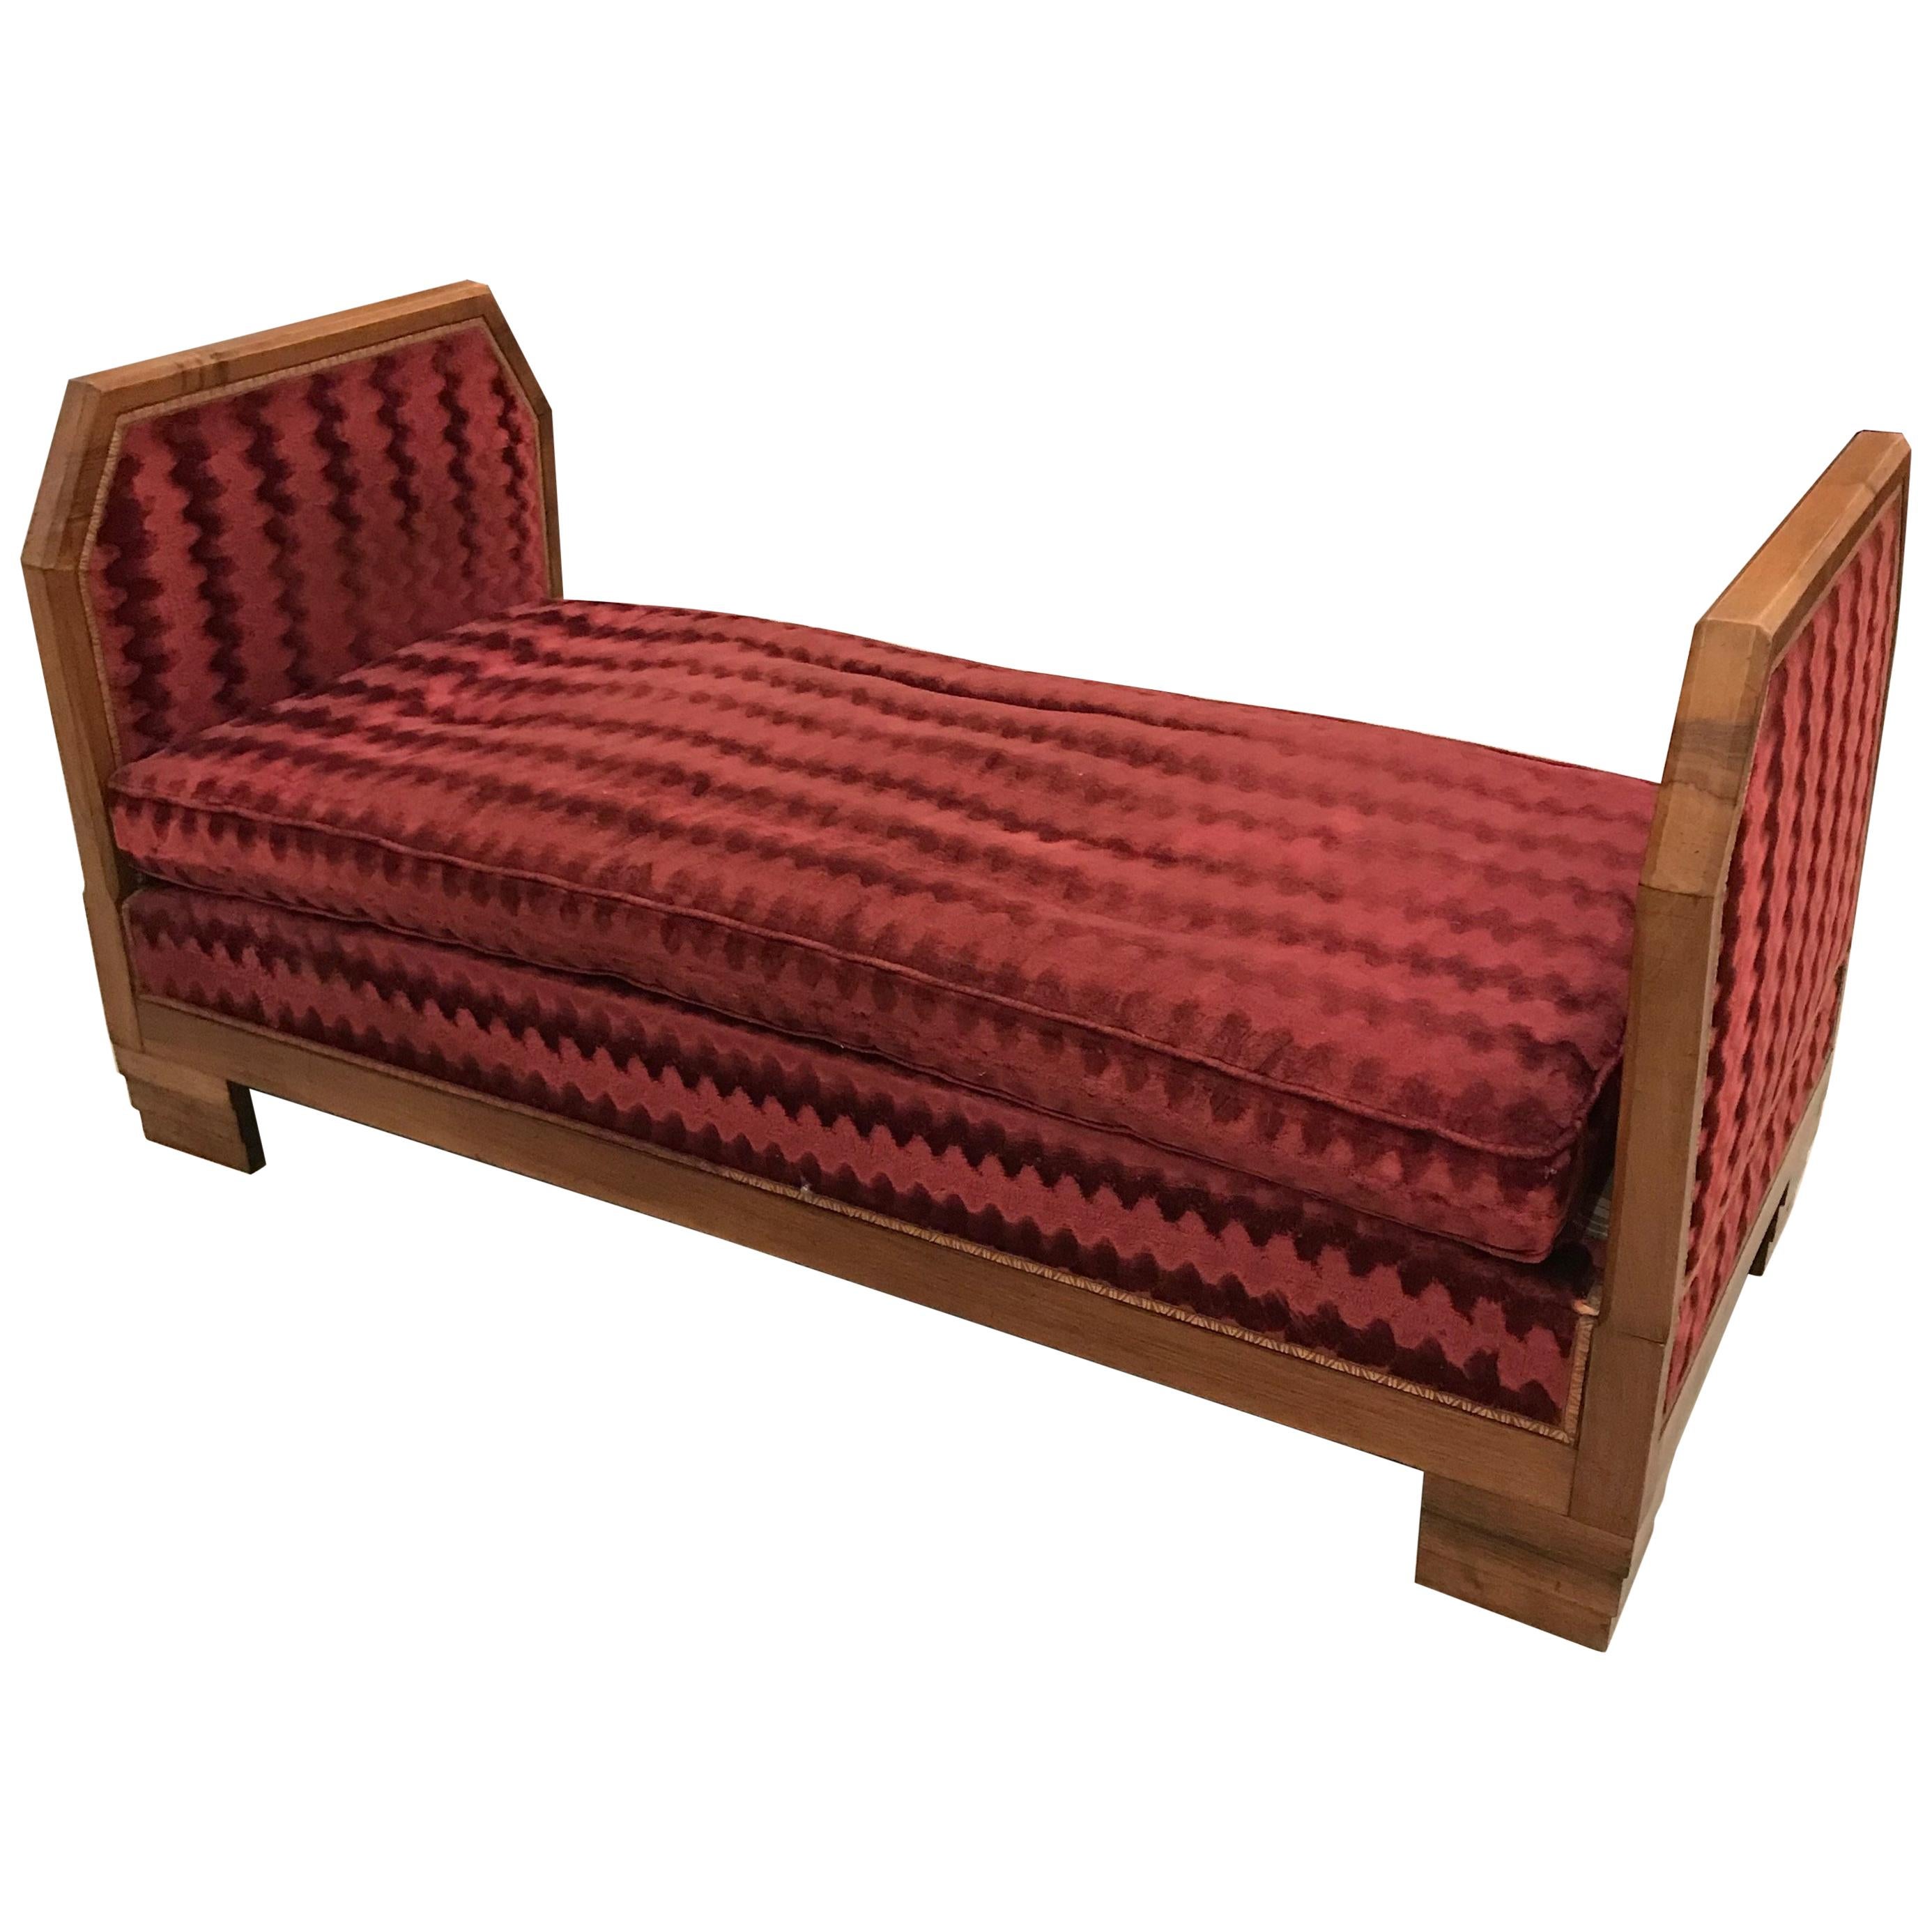 French Art Deco Day Bed For Sale